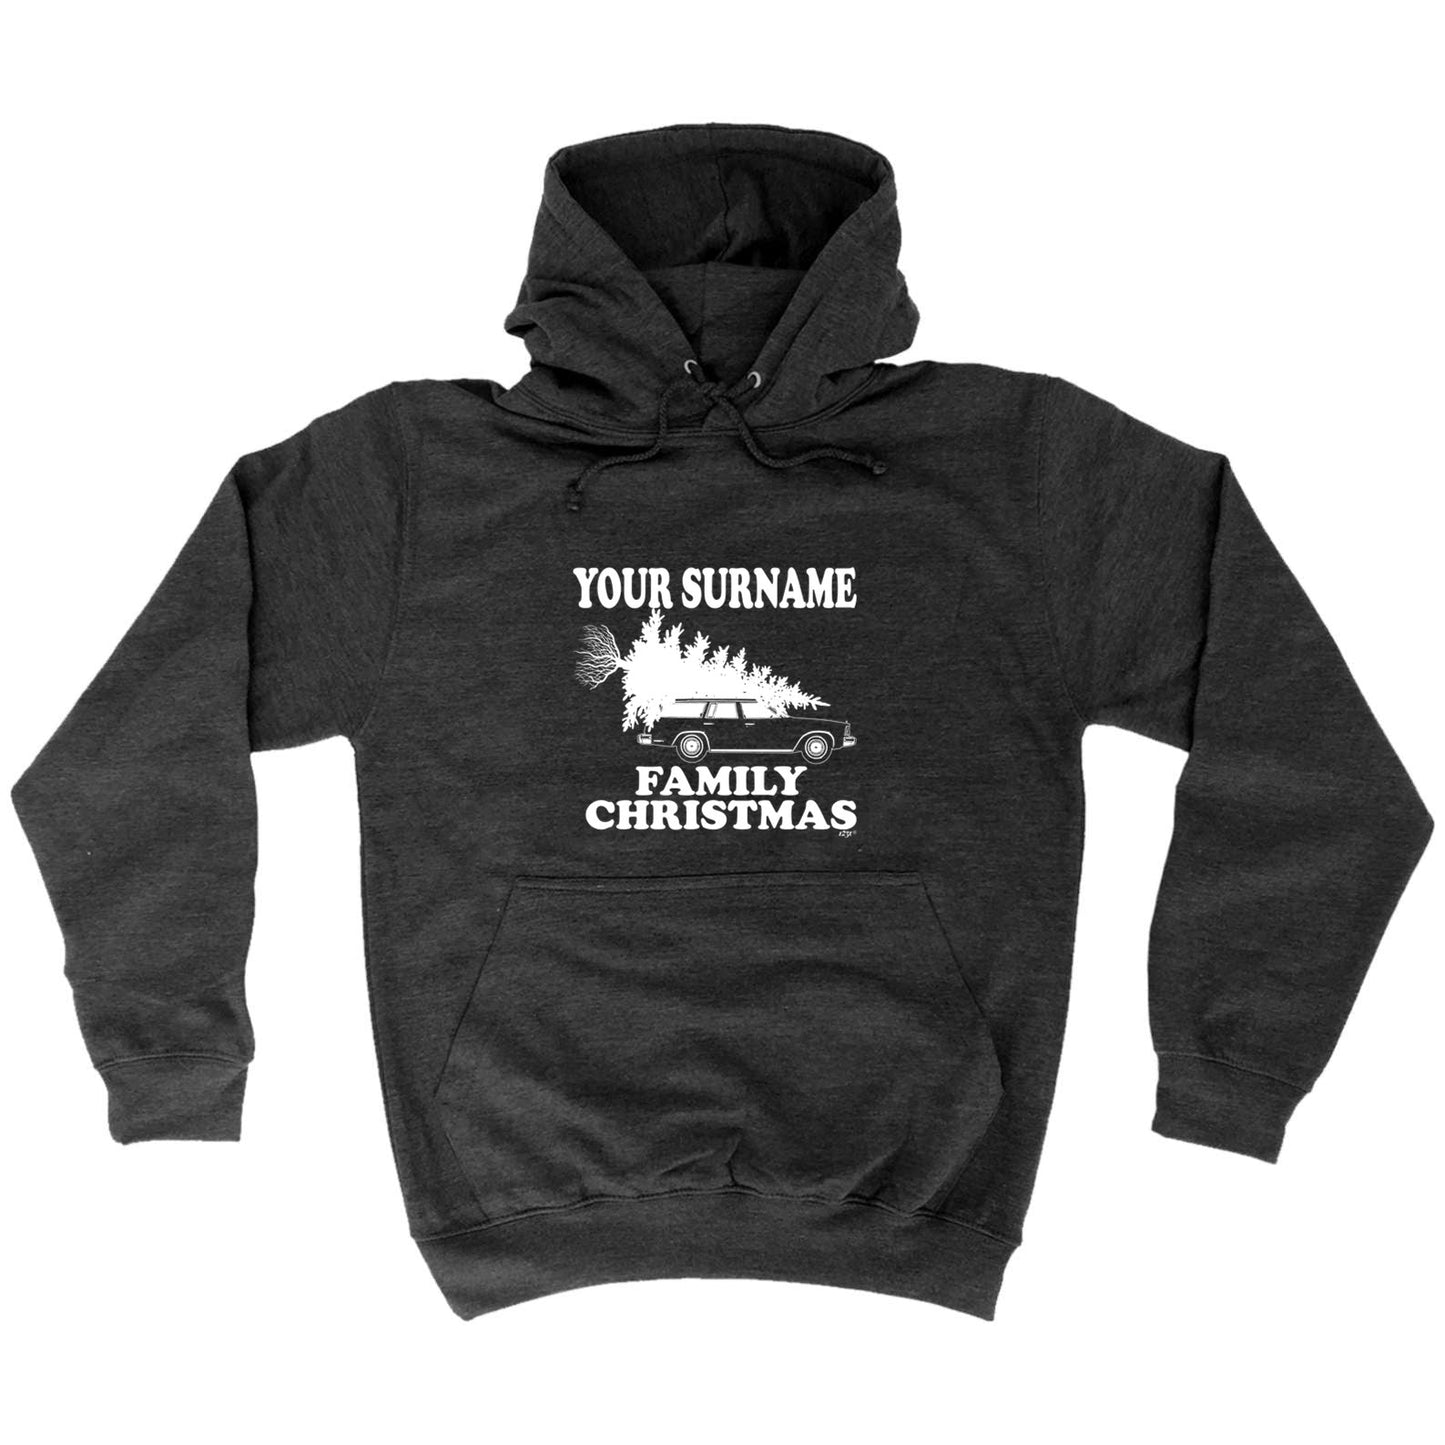 Family Christmas Your Surname Personalised - Xmas Novelty Hoodies Hoodie